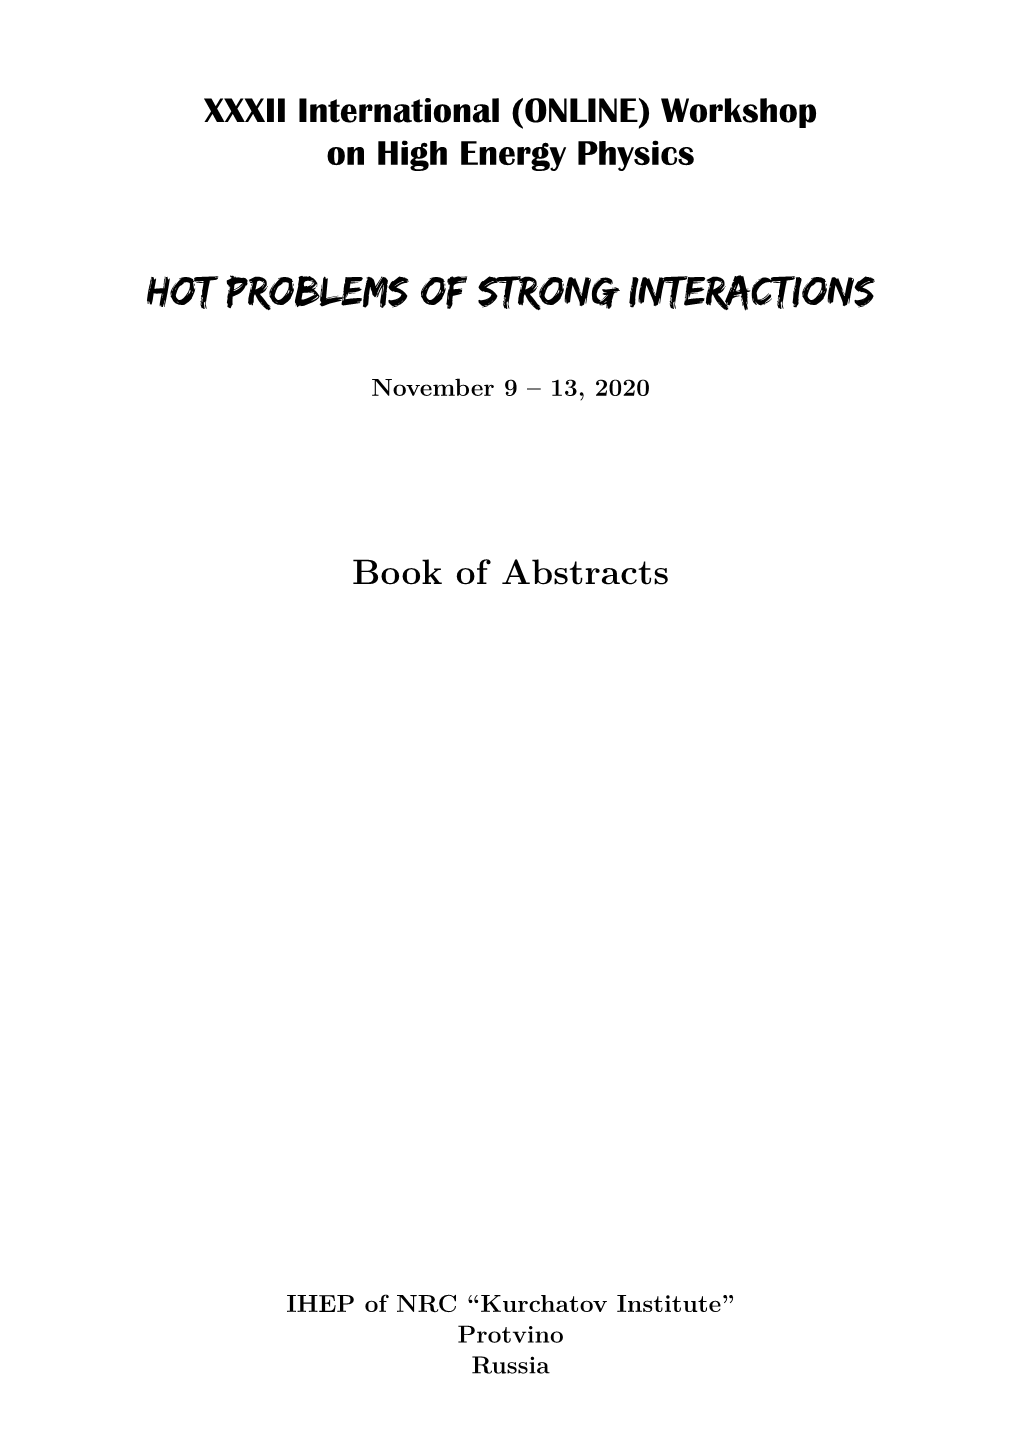 Hot Problems of Strong Interactions